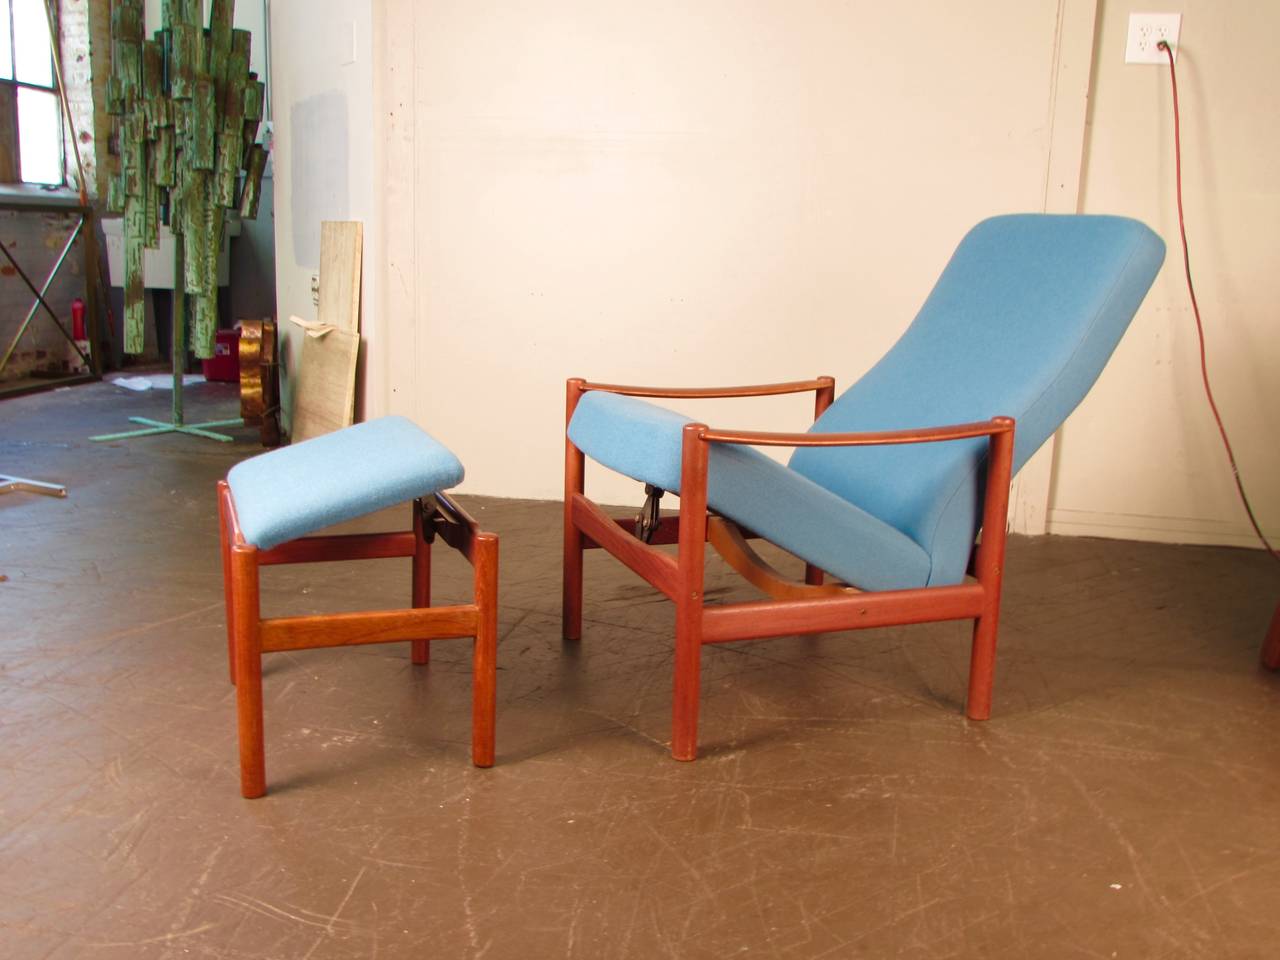 Handsome reclining lounge chair and ottoman by Westnofa, Norway, 1960s. This piece is extremely comfortable and in excellent condition. Newly reupholstered. Teak frame has a gorgeous aged tone.

We offer free regular deliveries to NYC and